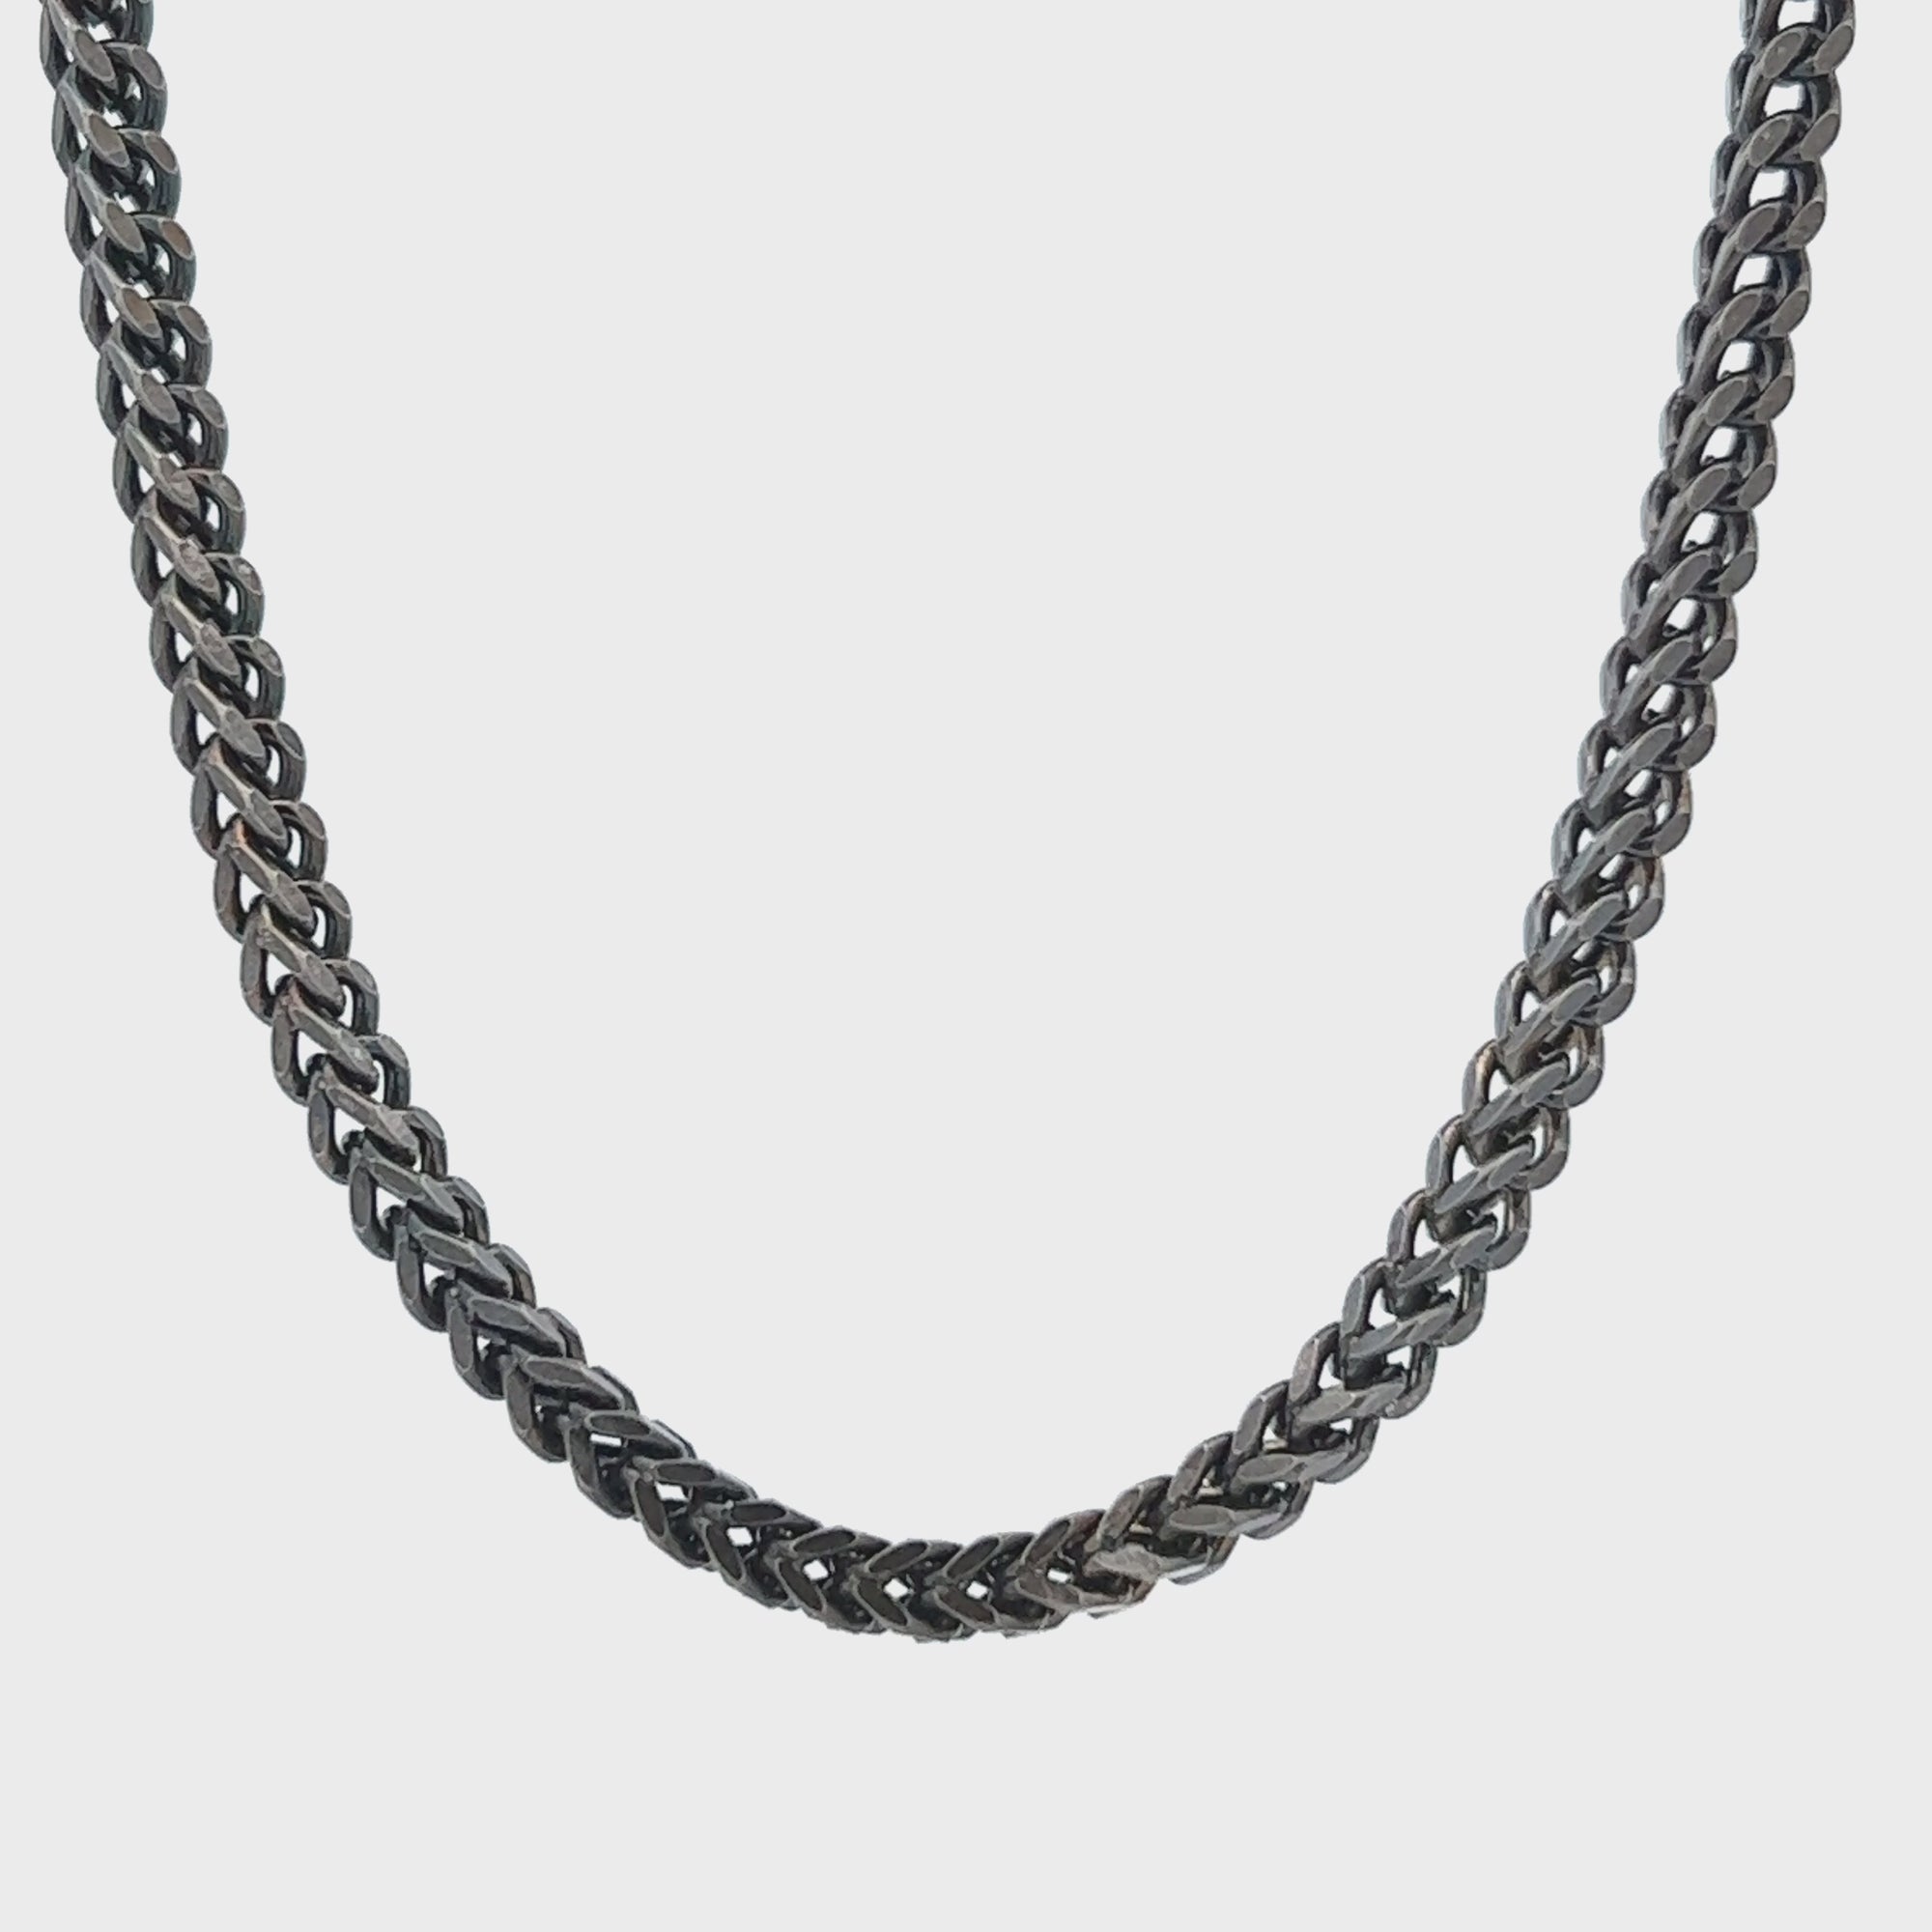 Antiqued Silver Tone Stainless Steel Oxidized Finish 4mm Franco Chain